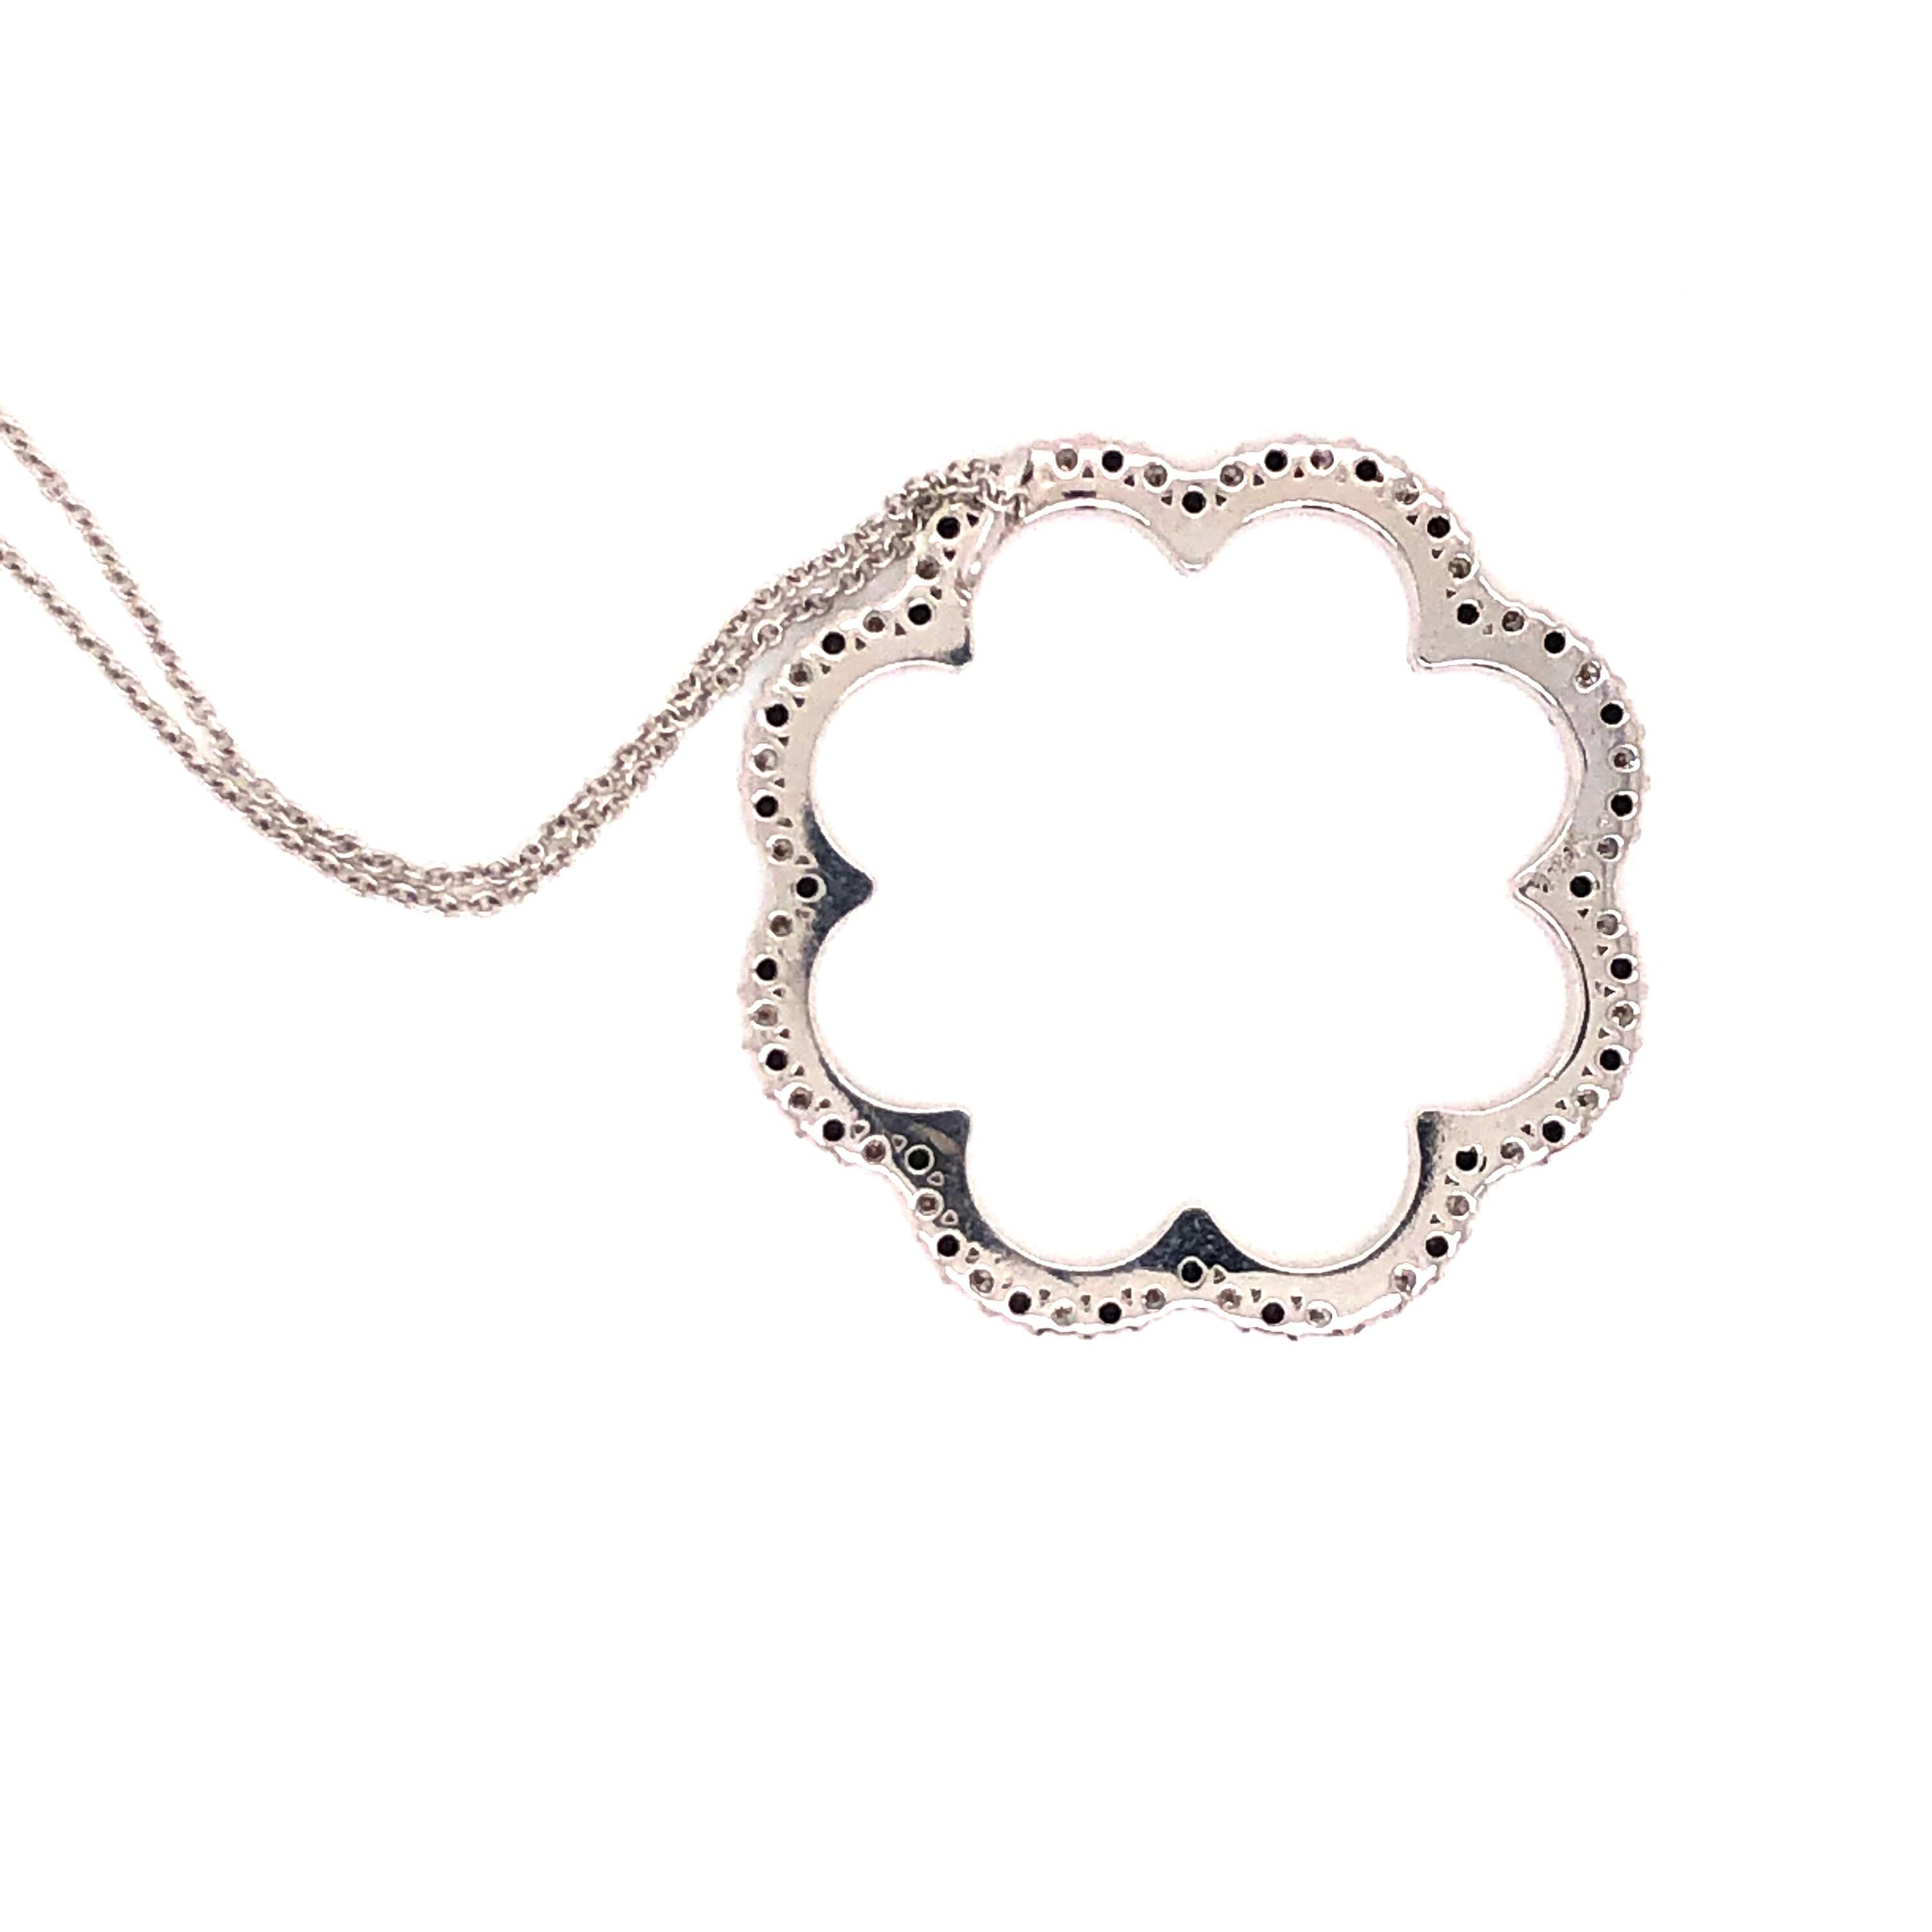 Black and White Diamond Flower Necklace 3